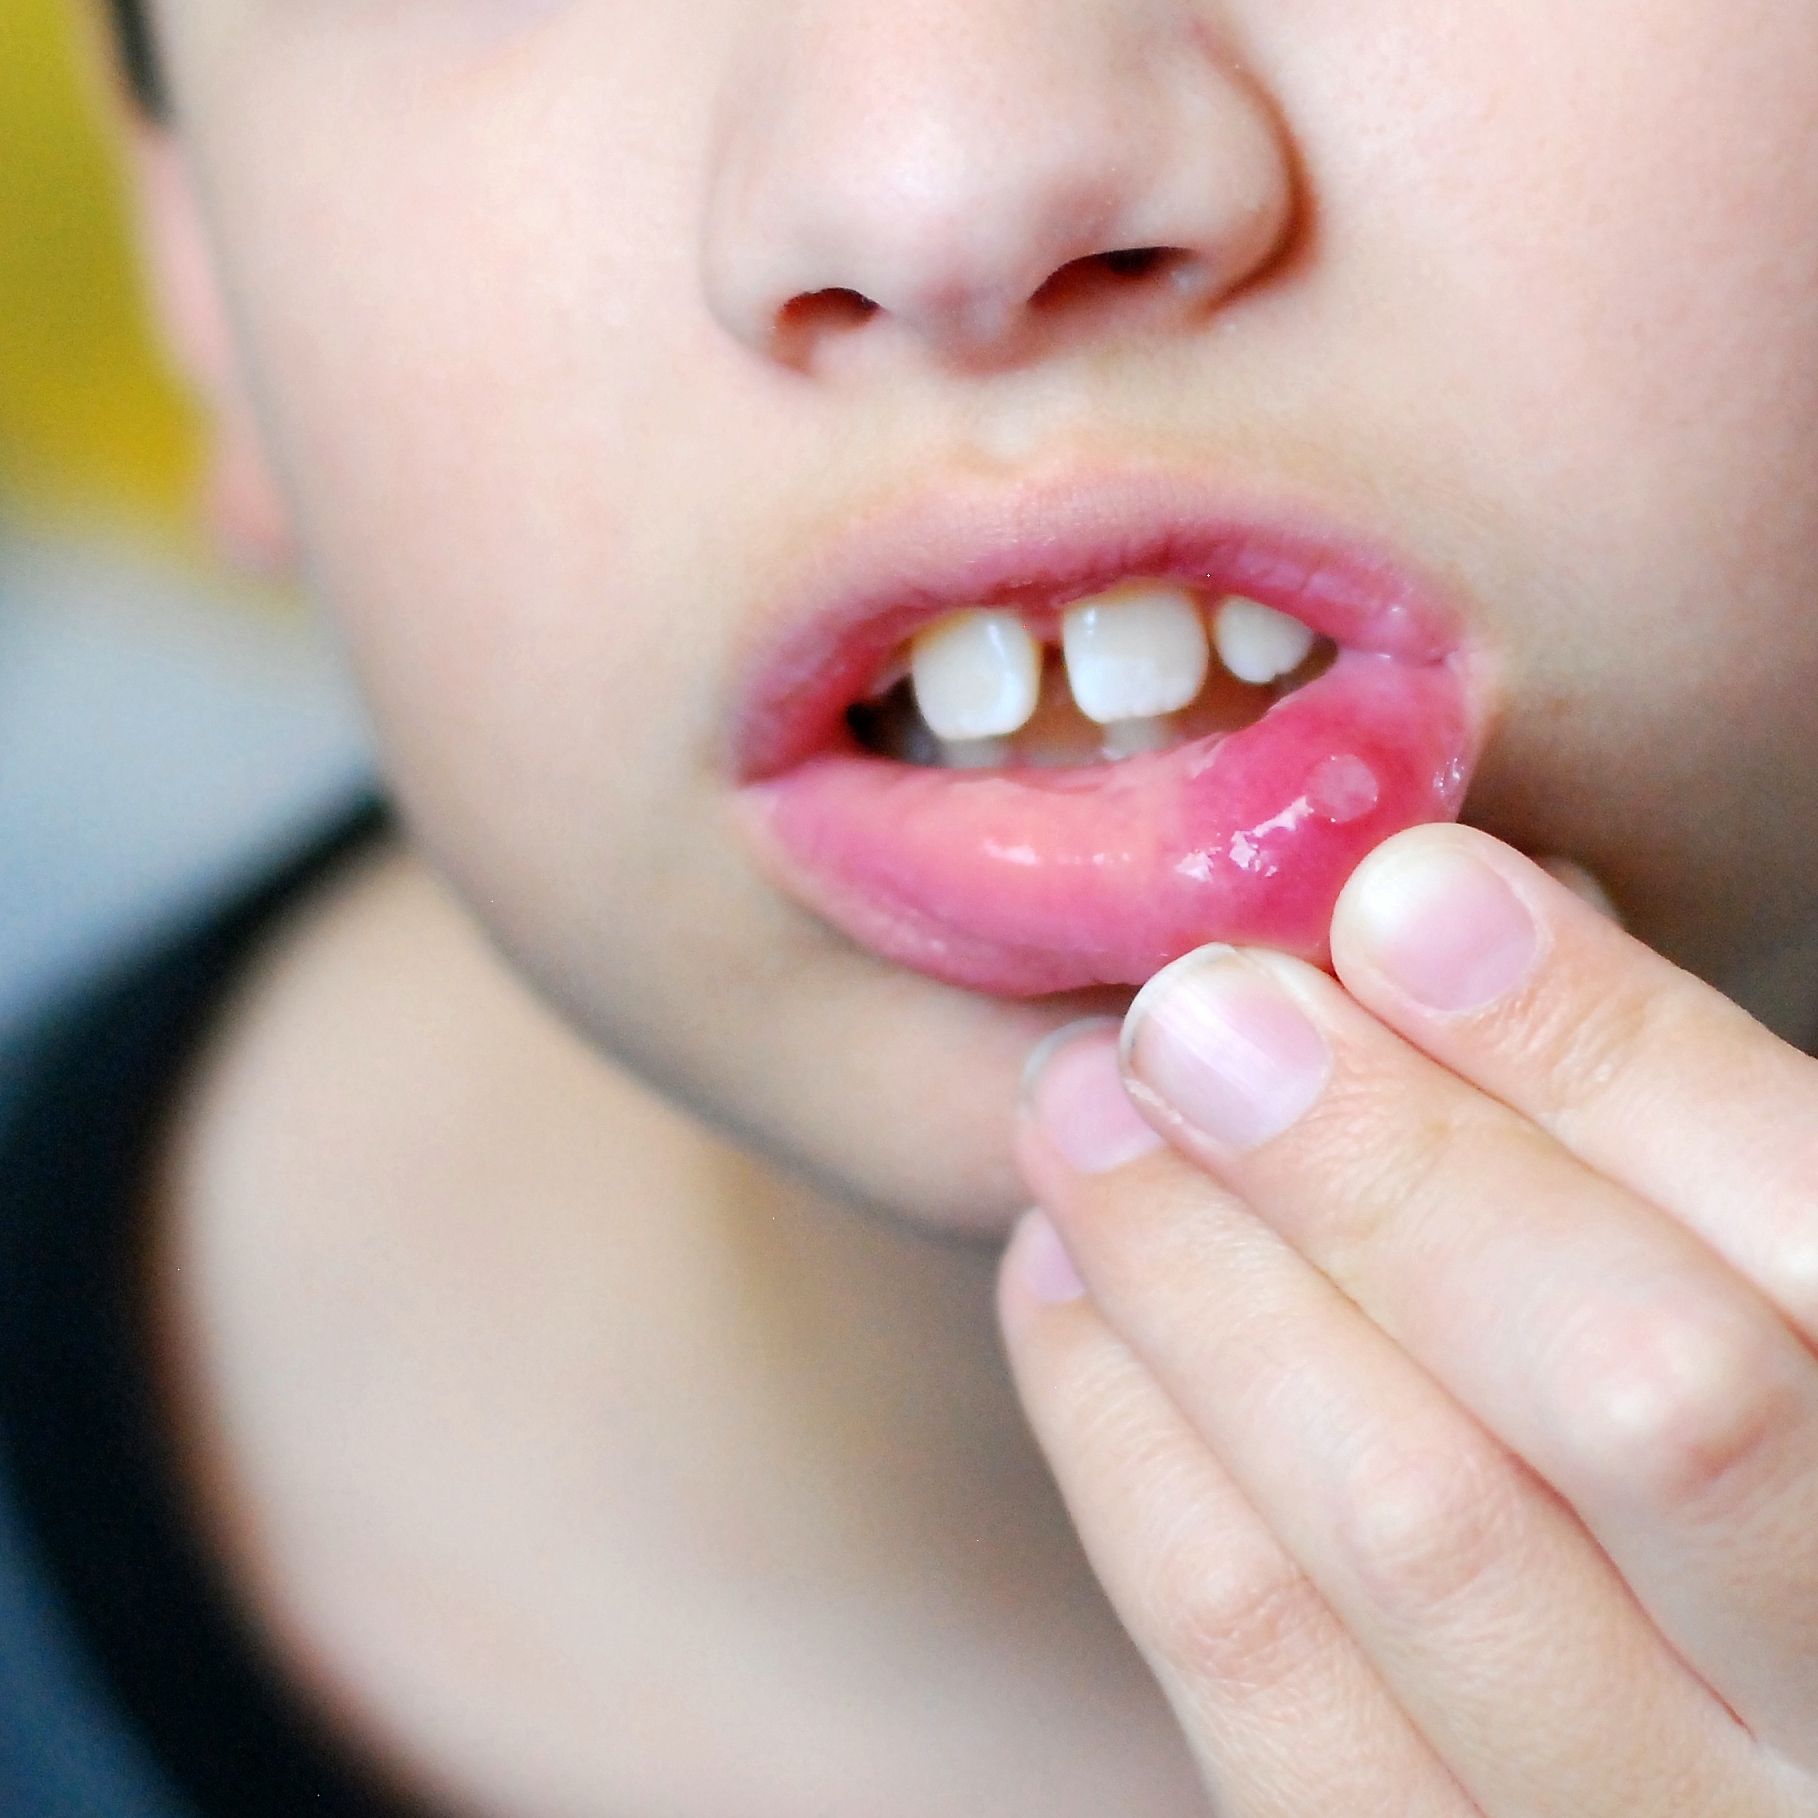 Causes of mouth ulcers - HSE.ie